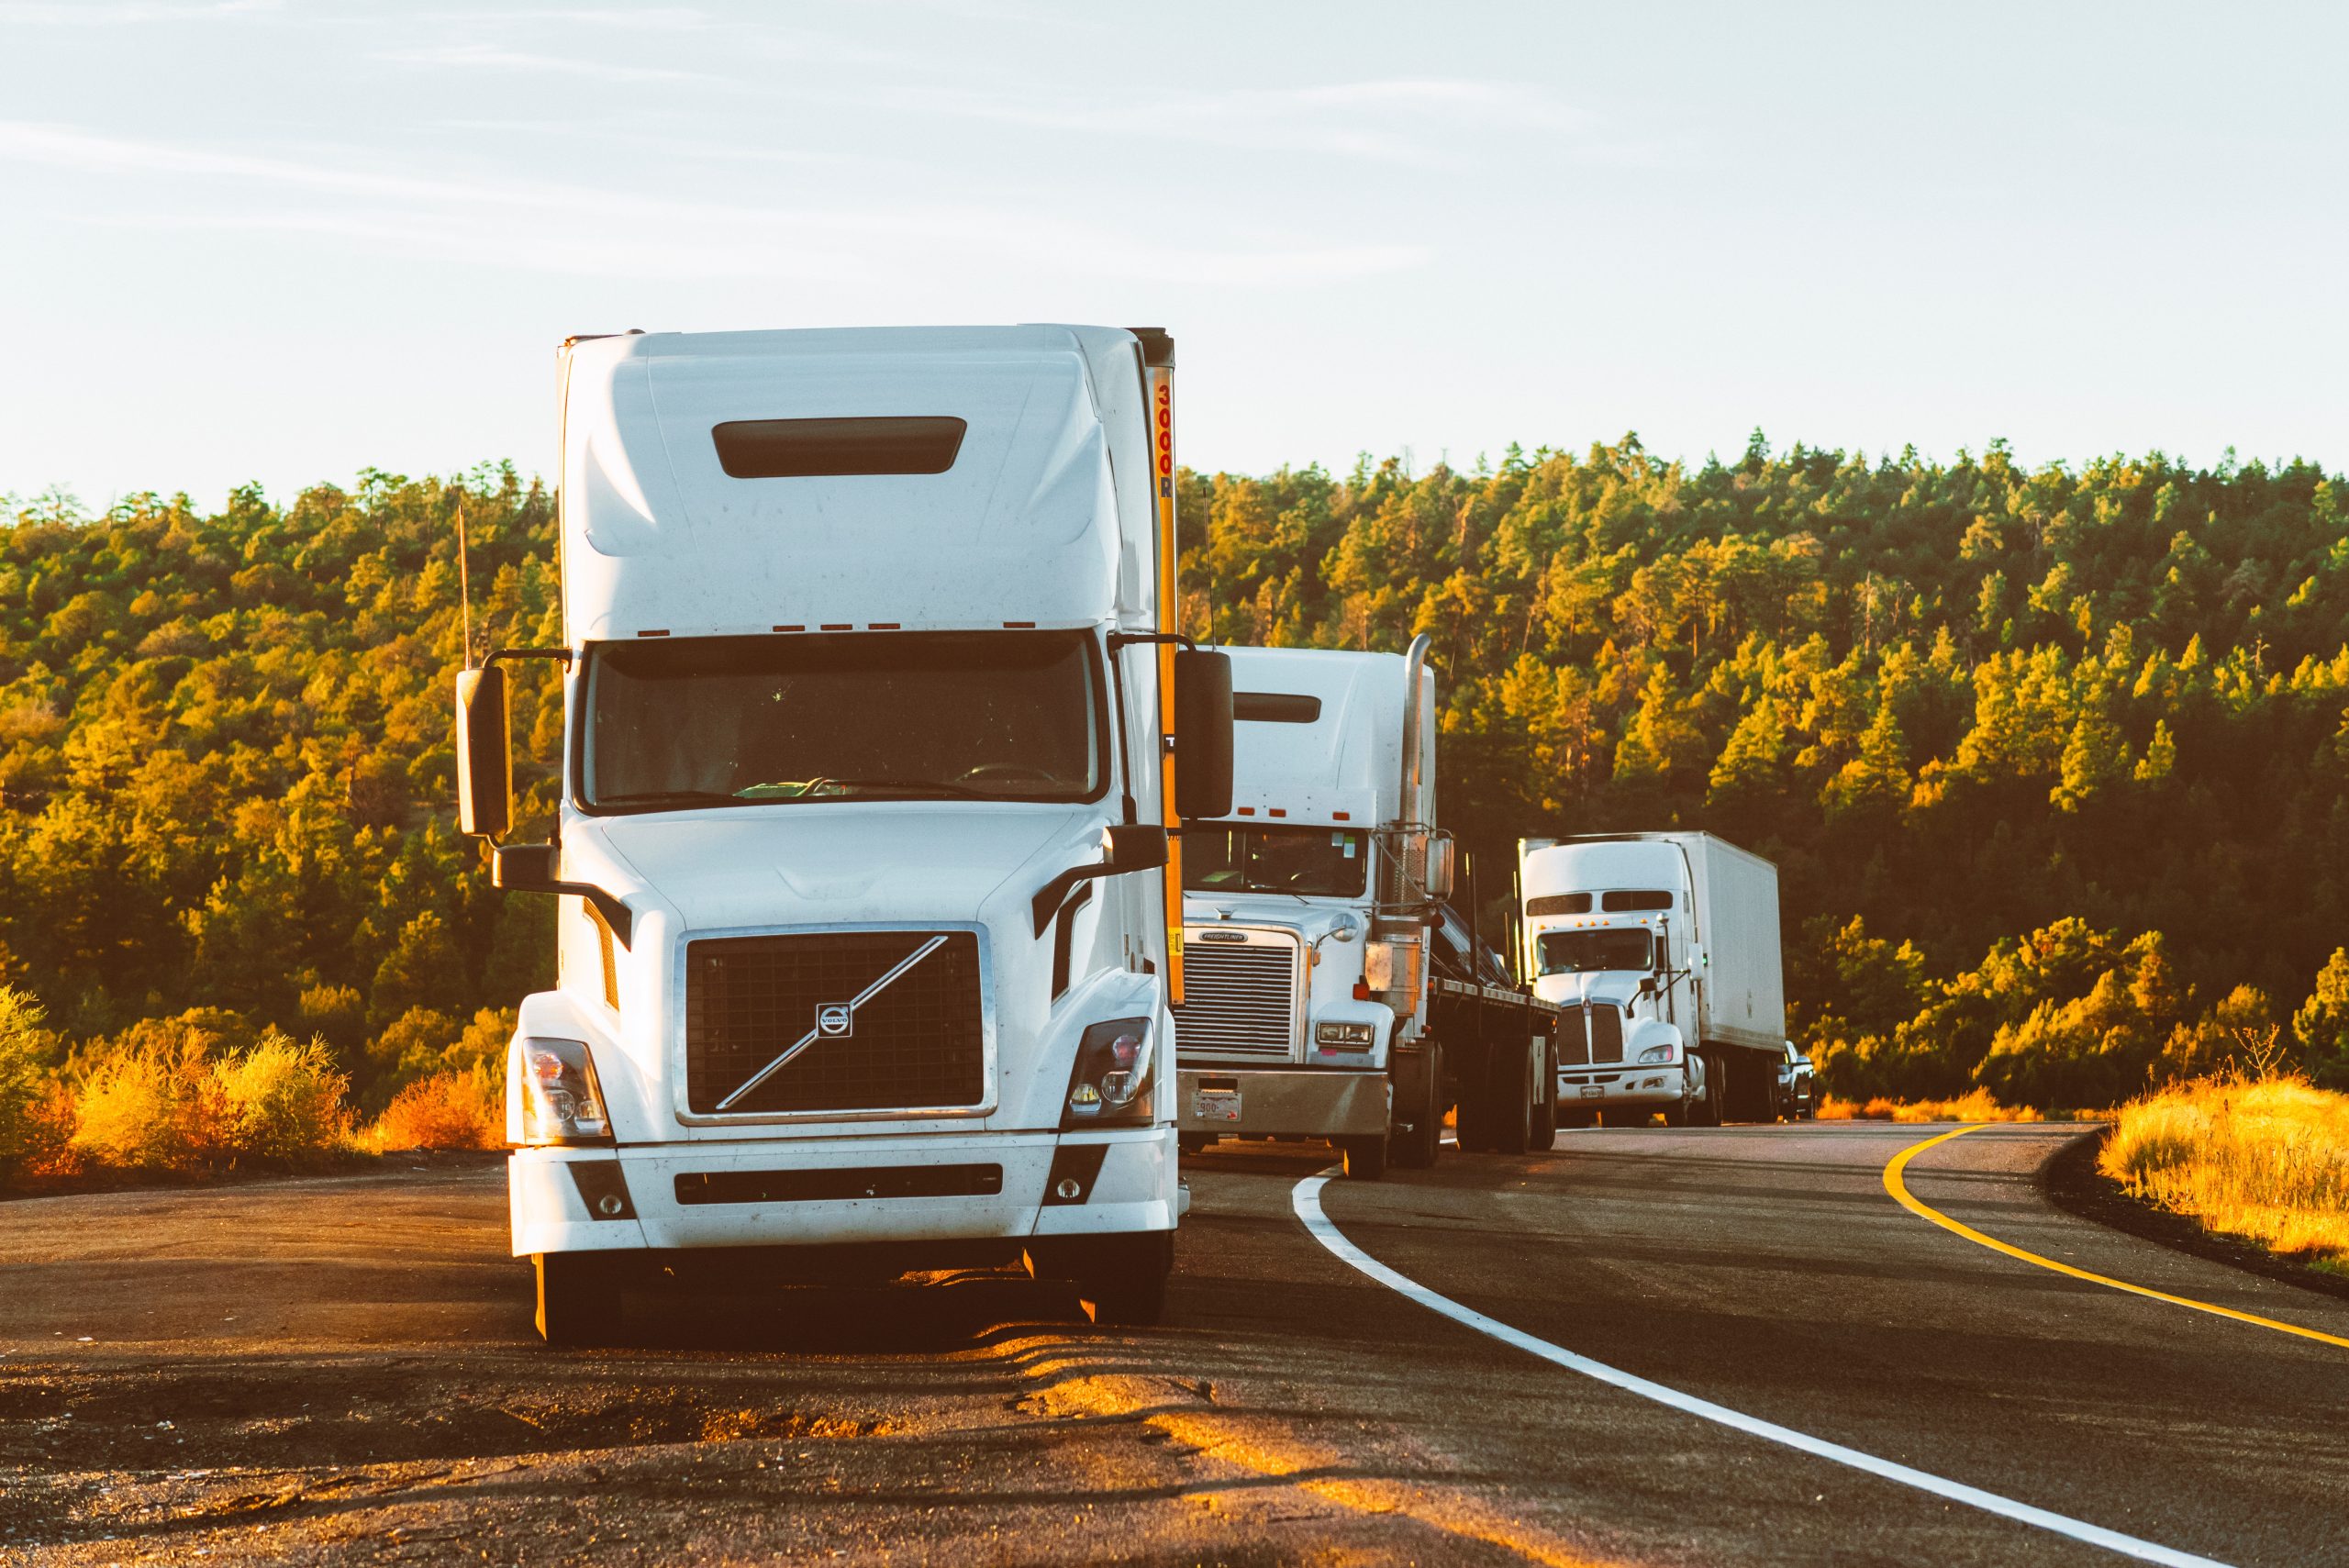 fleet of trucks outfitted with gps fleet tracking devices